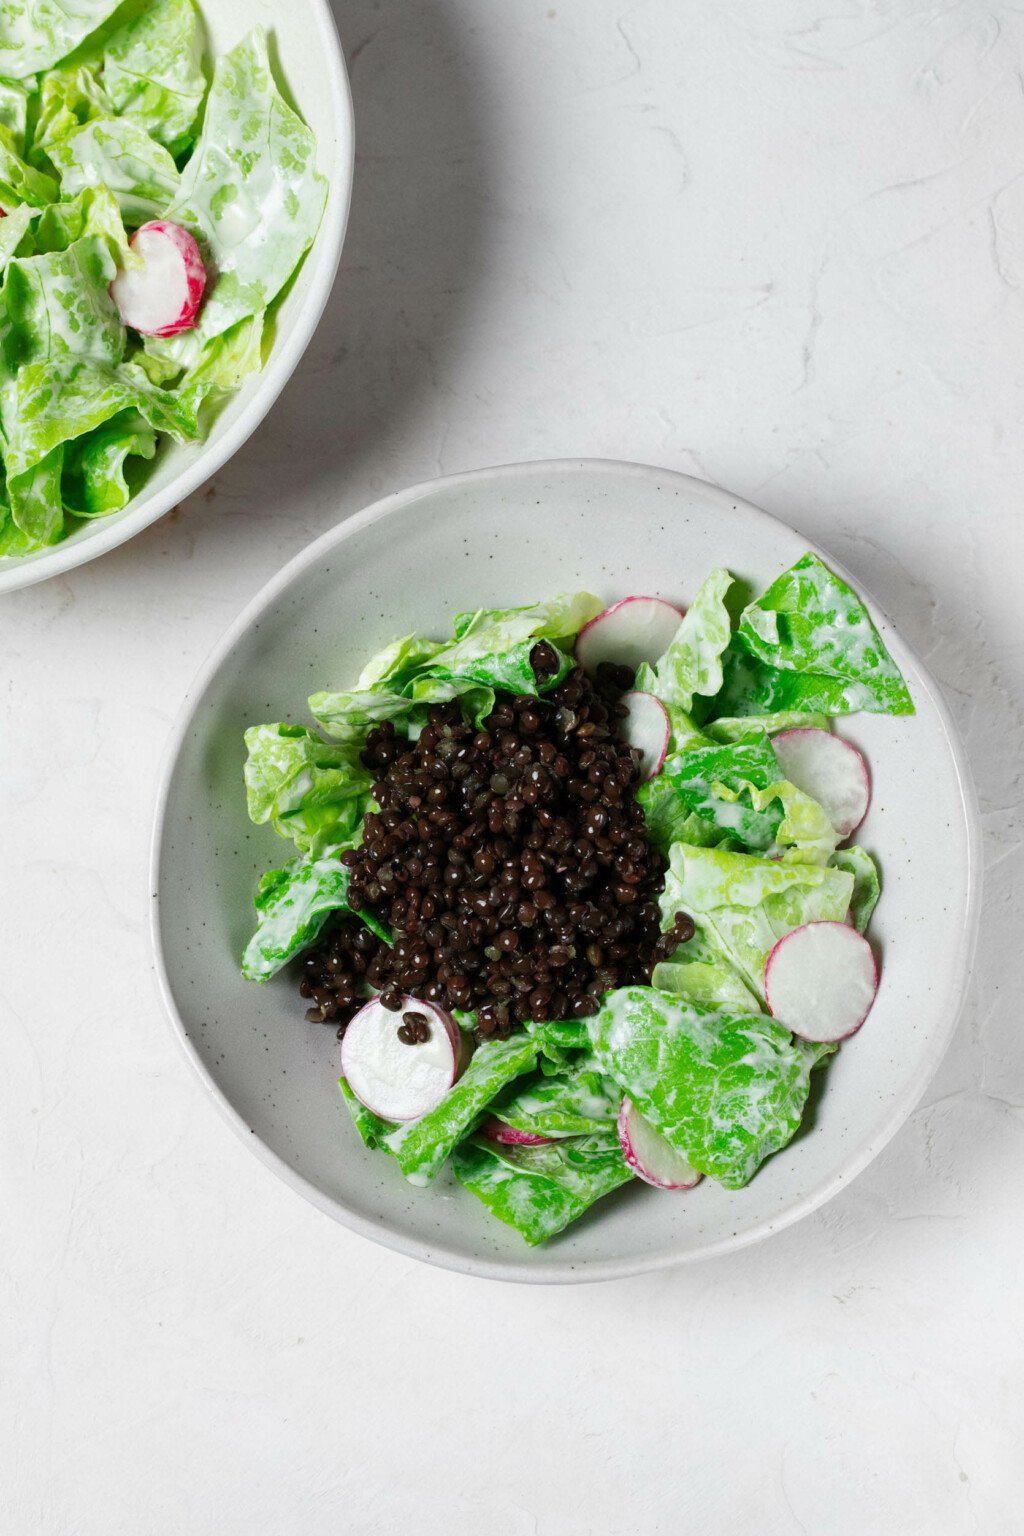 An overhead image of two round salad bowls, which are filled with a light, butter lettuce and radish salad. The salad is topped with black lentils.